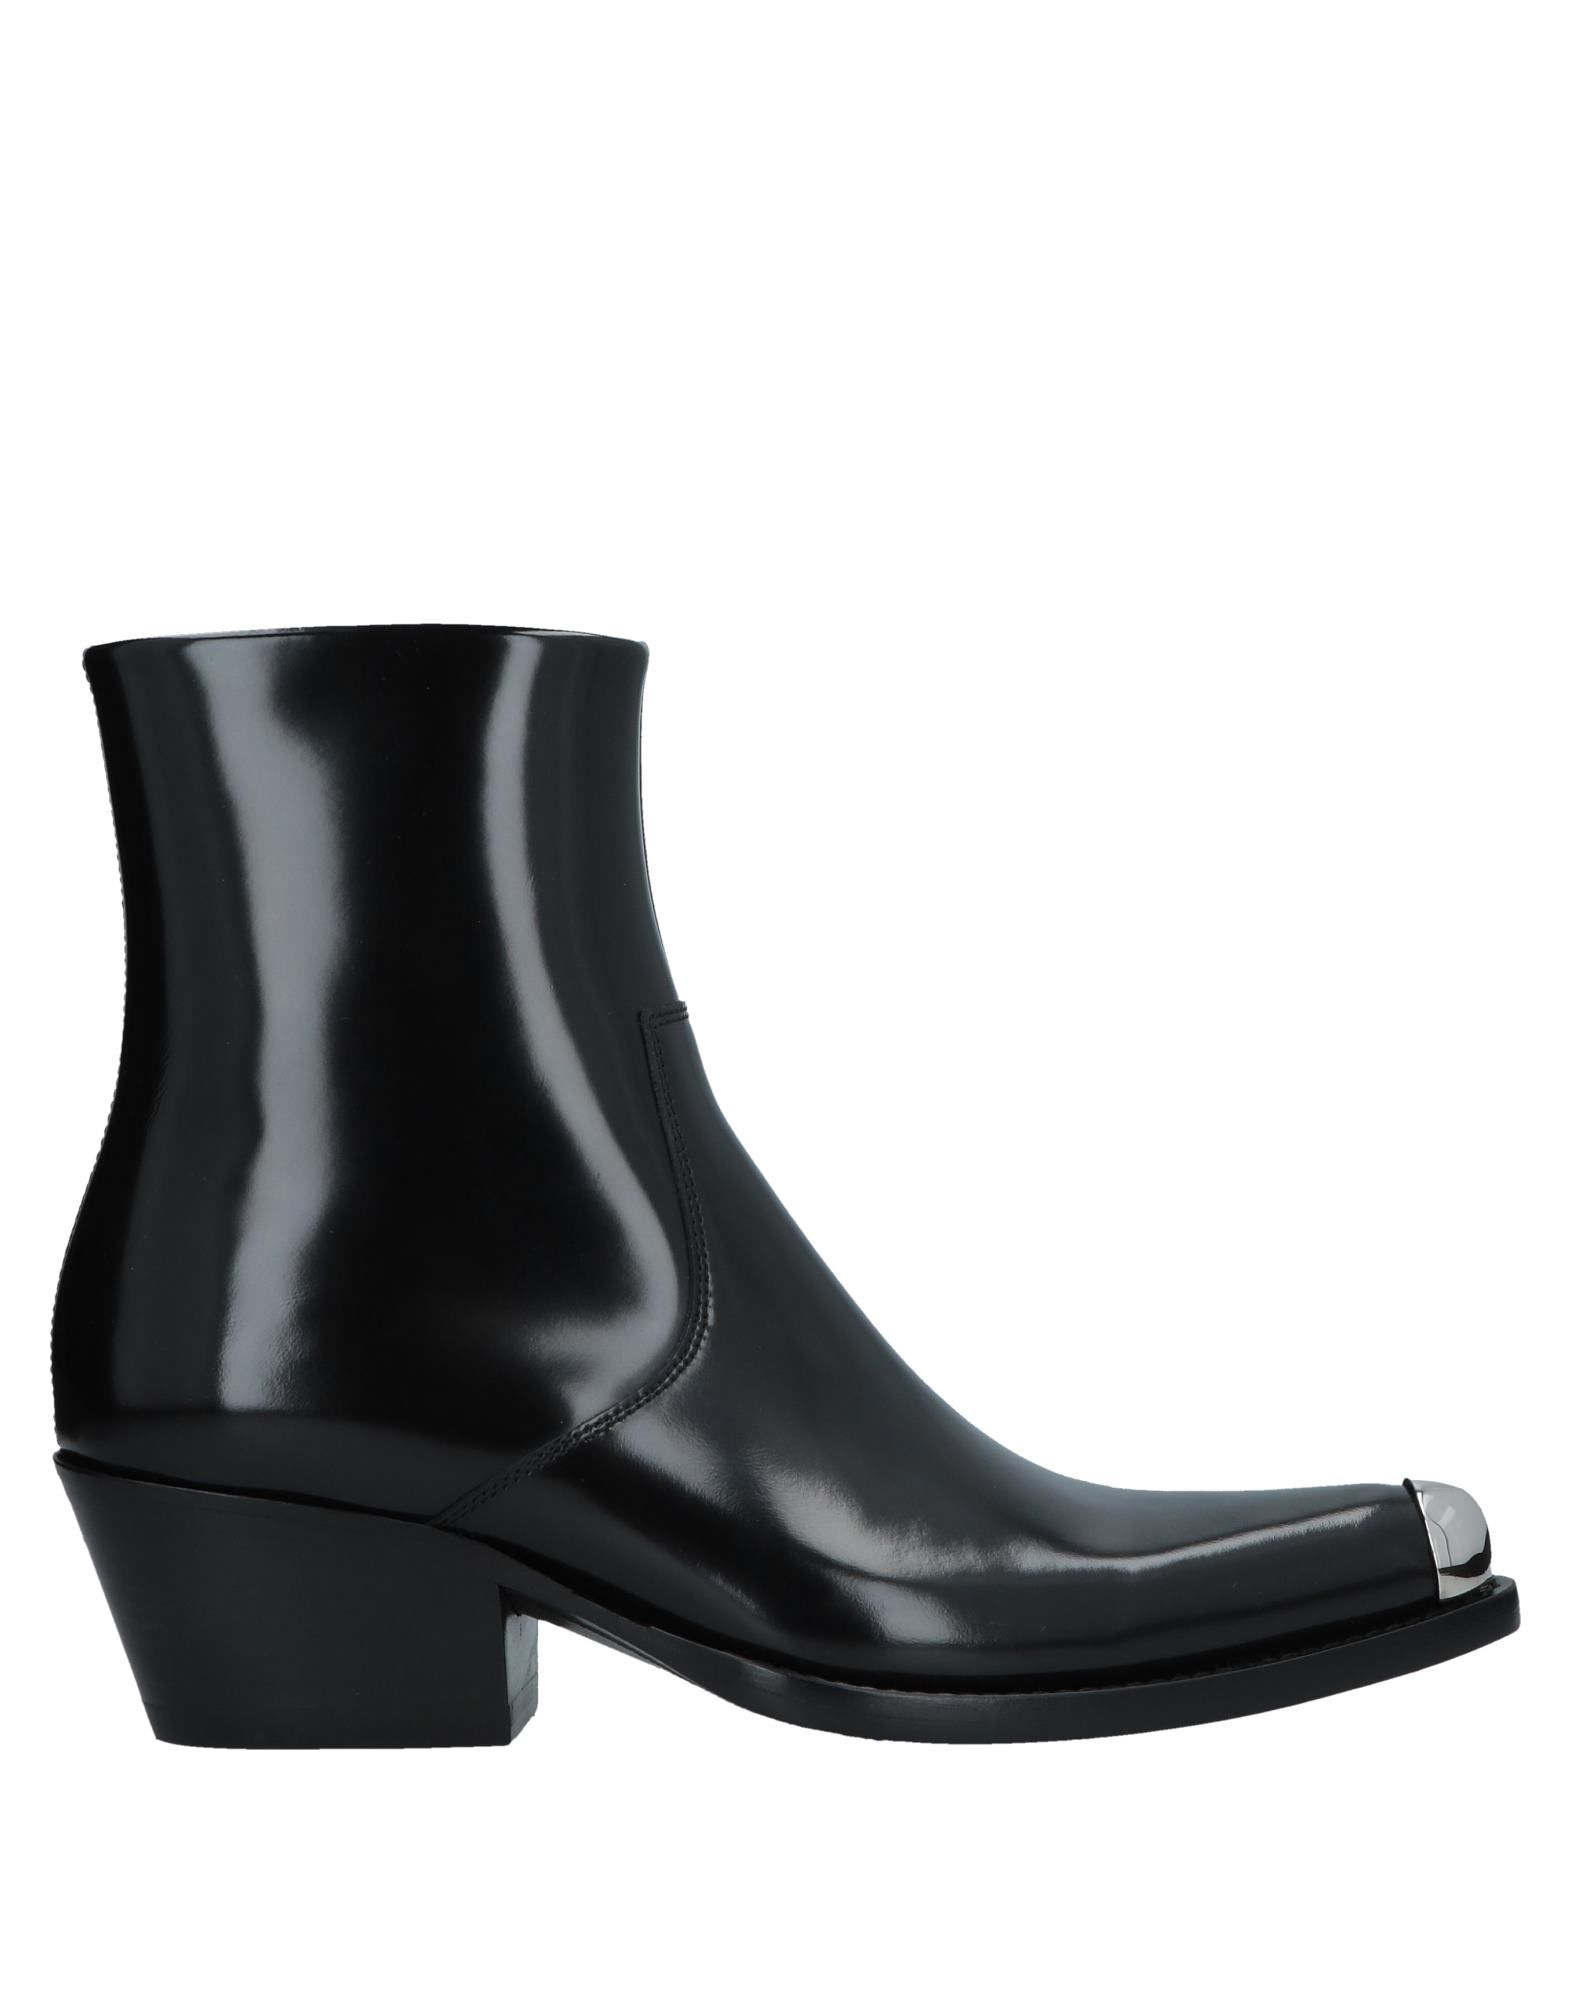 calvin klein 205w39nyc boots Boots 